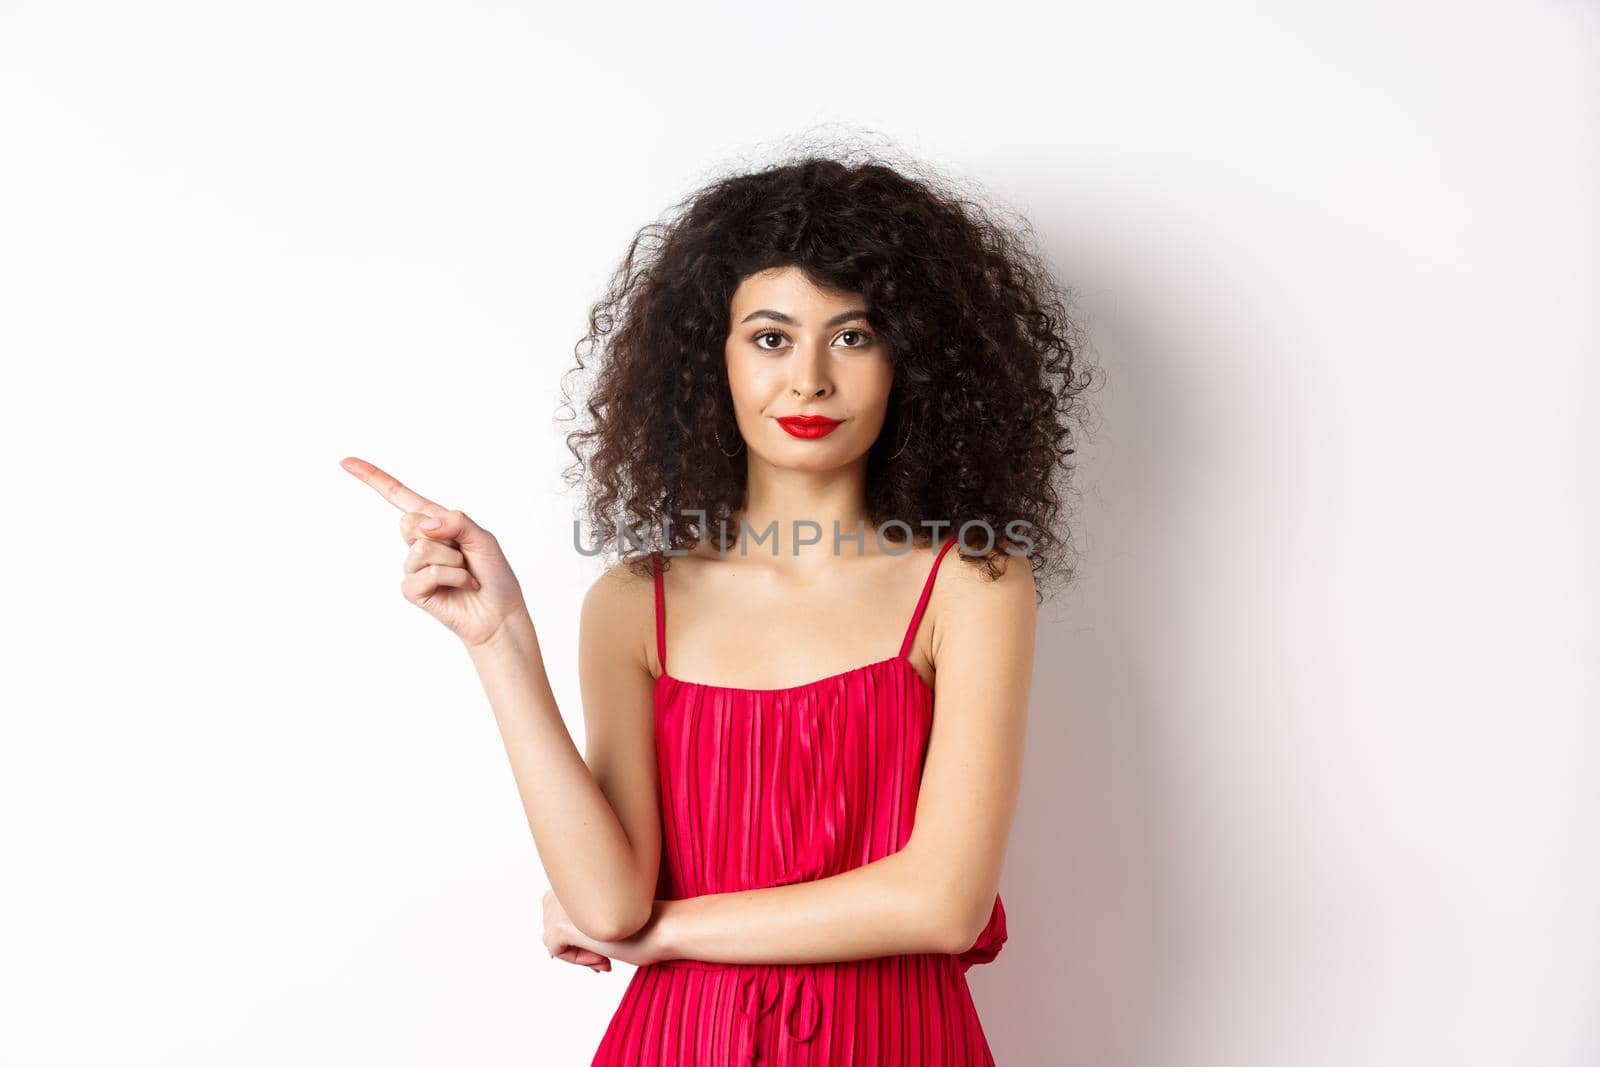 Attractive lady in red dress and makeup pointing finger left, showing logo, standing over white background.